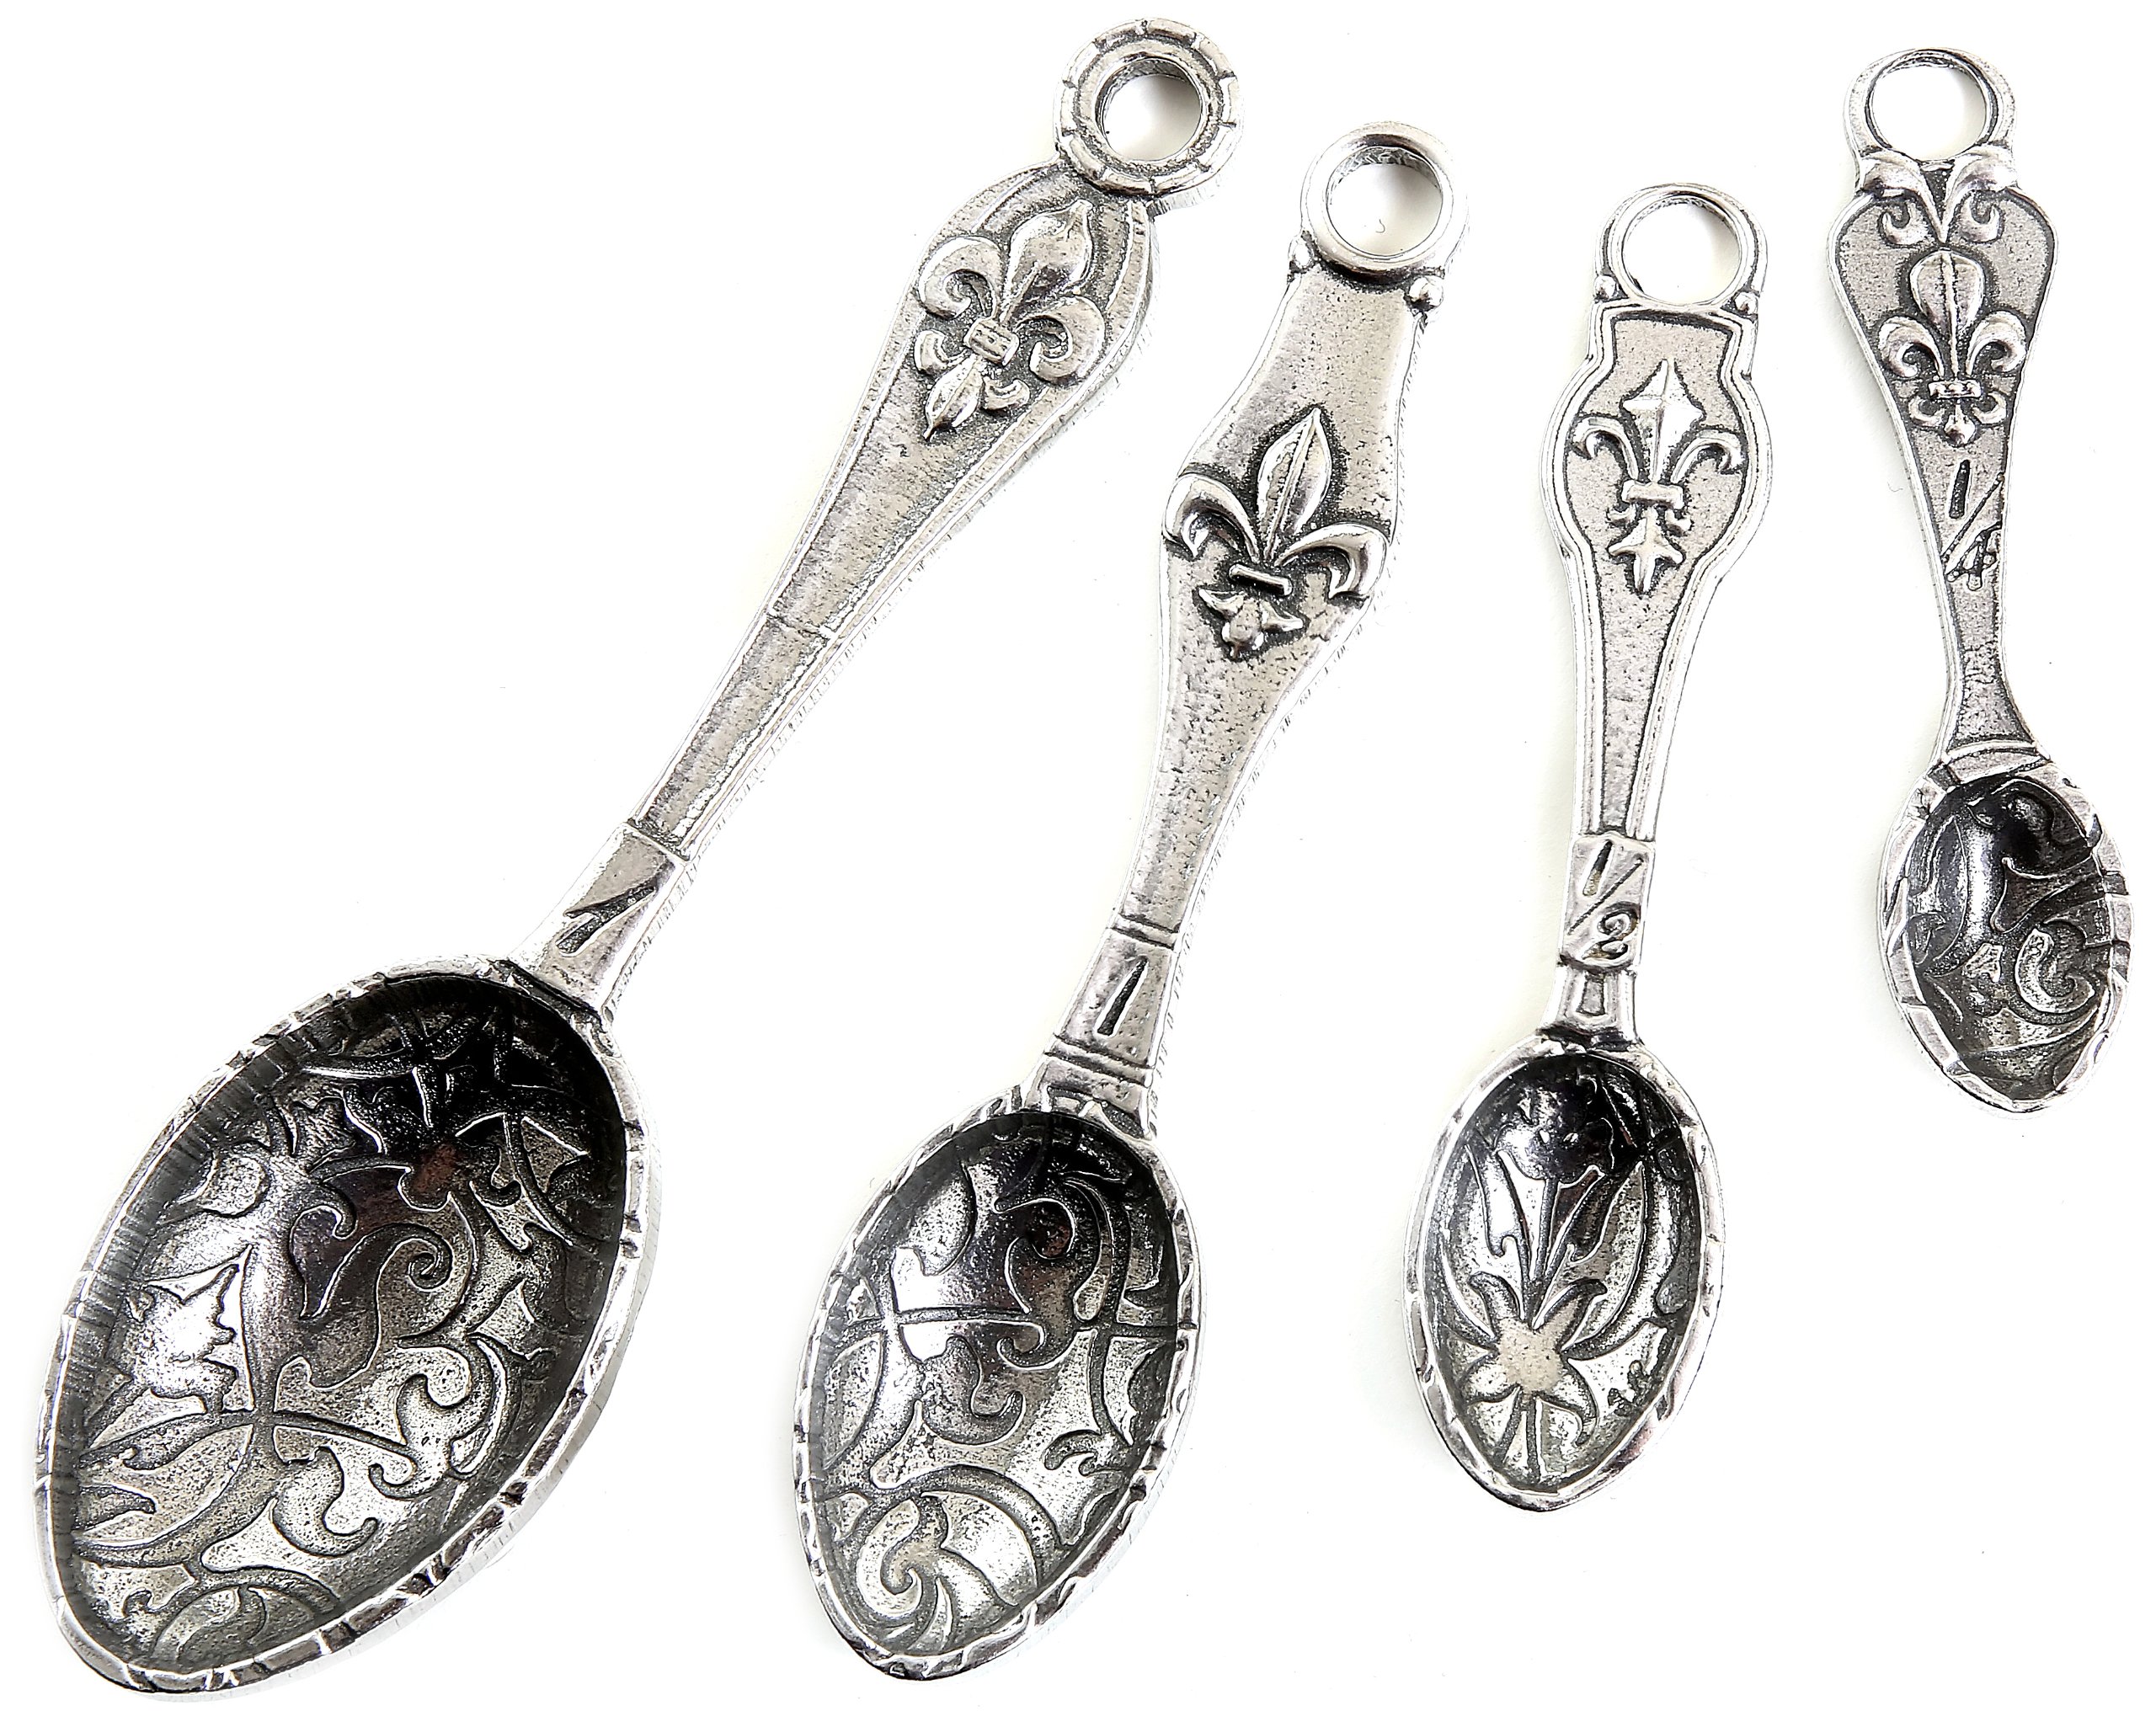 Crosby & Taylor Fleur de Lys Pewter Measuring Spoon Set without Display